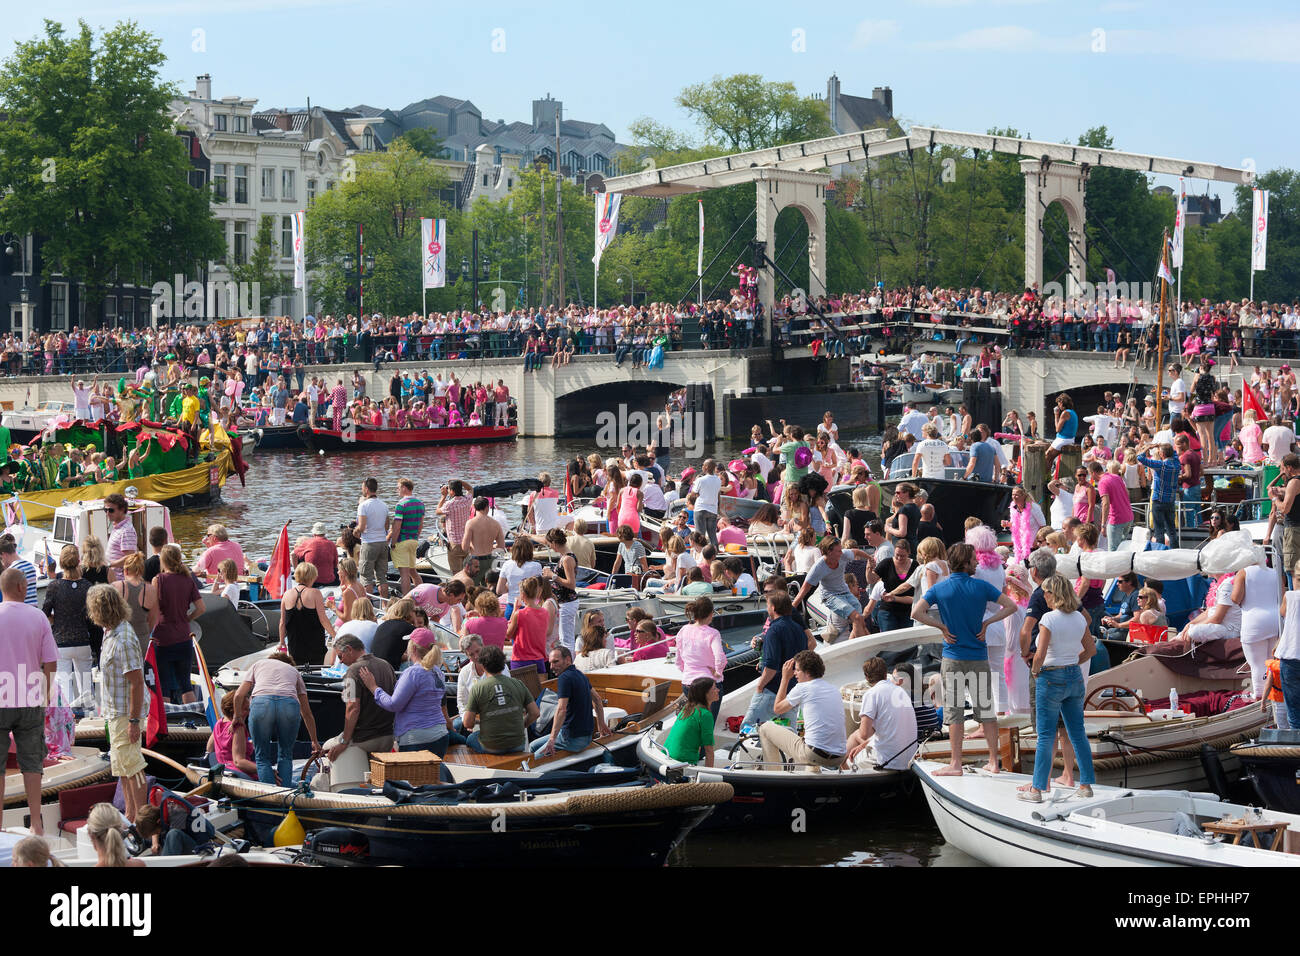 Amsterdam Gay Pride Canal Parade at the Magere Brug or Skinny Bridge on the Amstel River Stock Photo